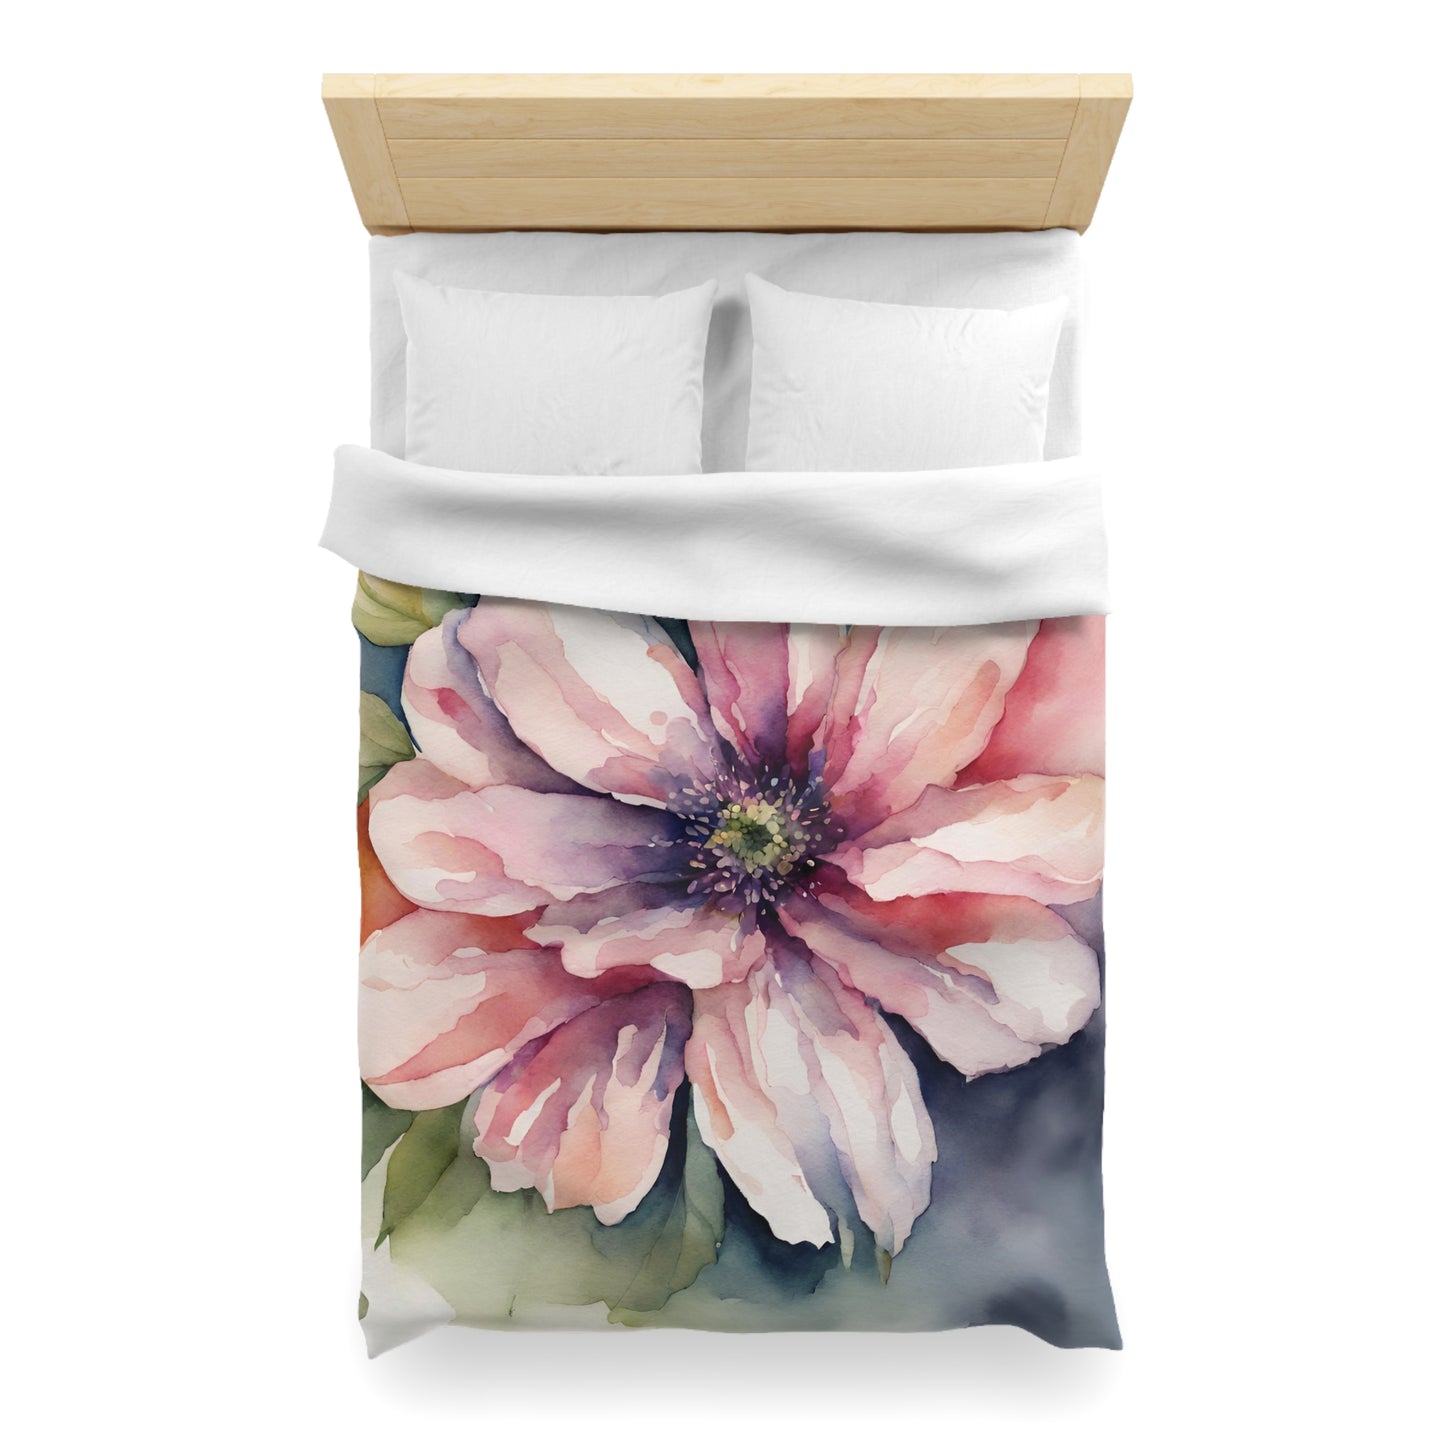 Stunning Graphic Watercolor Floral Duvet Cover